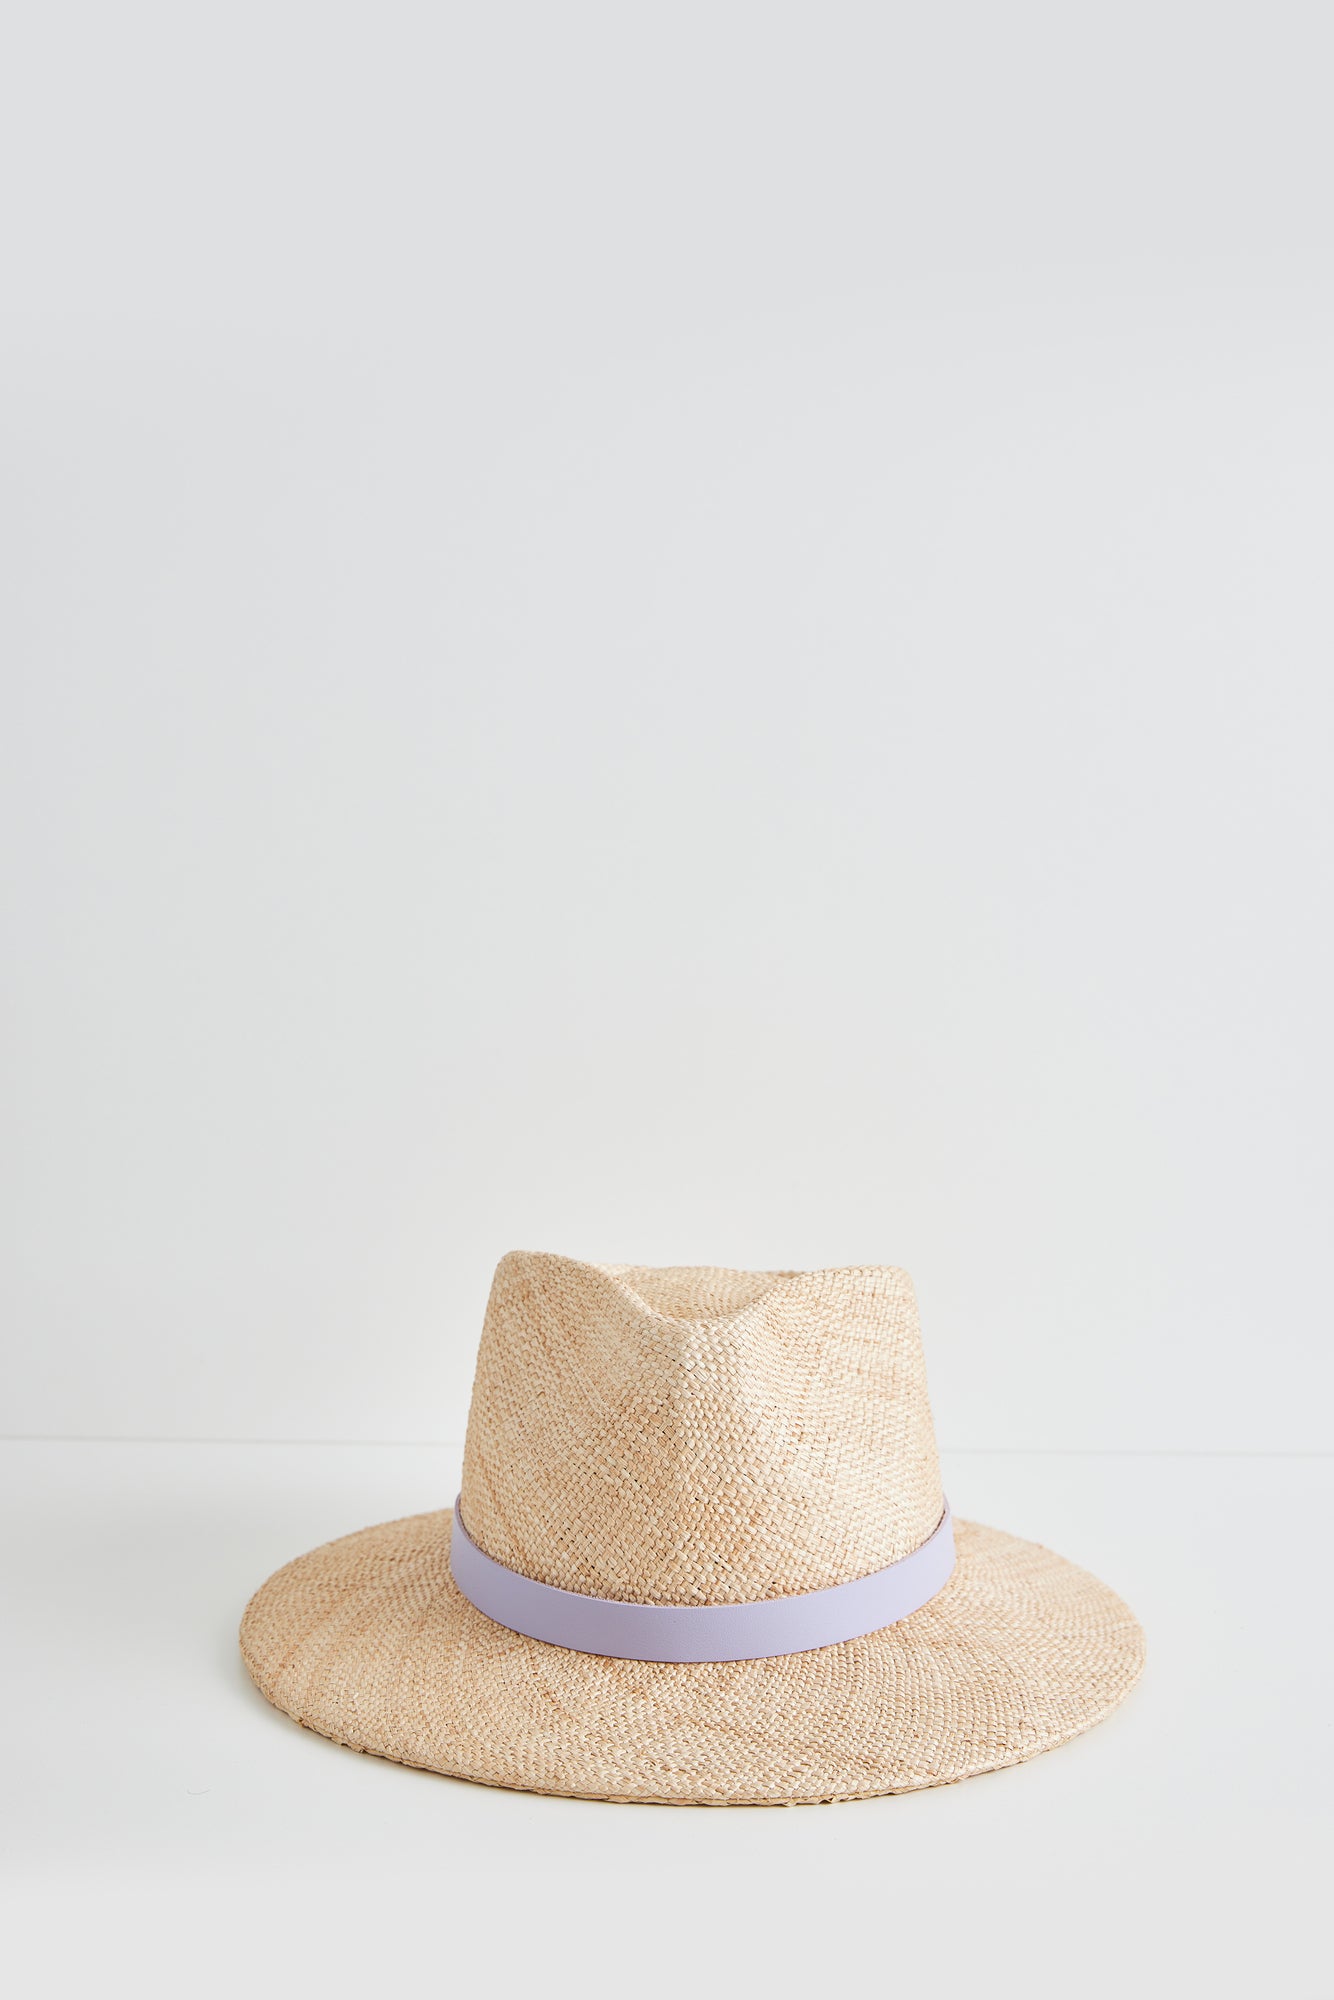 Vermisson - Natural straw with lilac leather trim